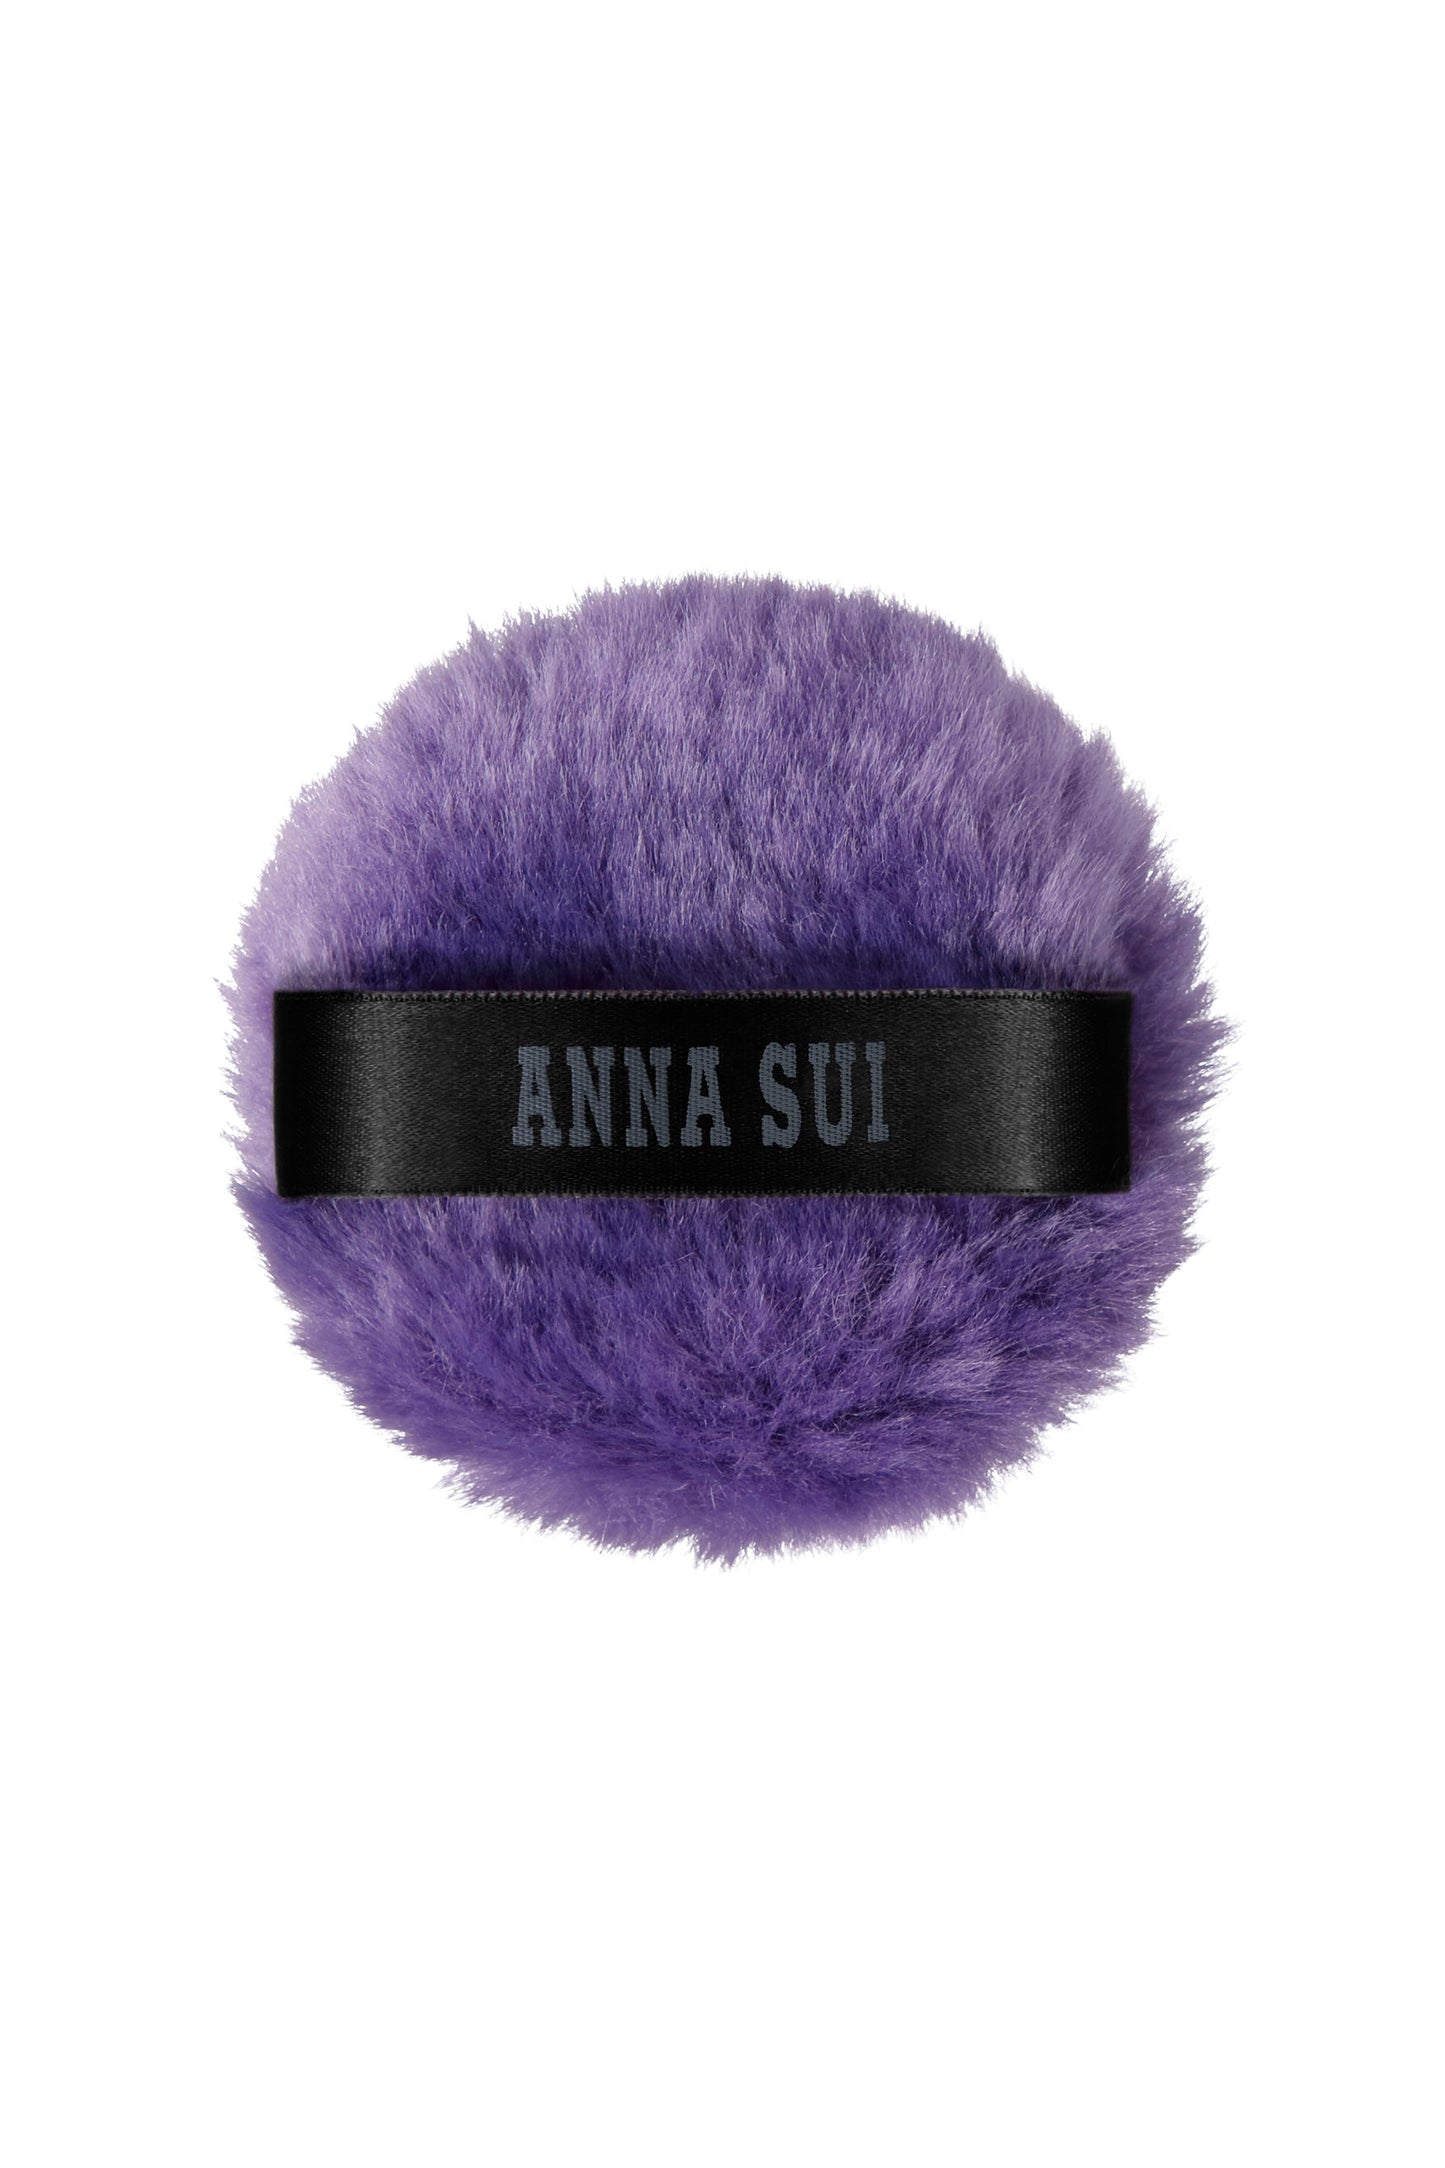 A round purple fluffy powder puff with black ribbon that helps set your base for an airbrushed look.